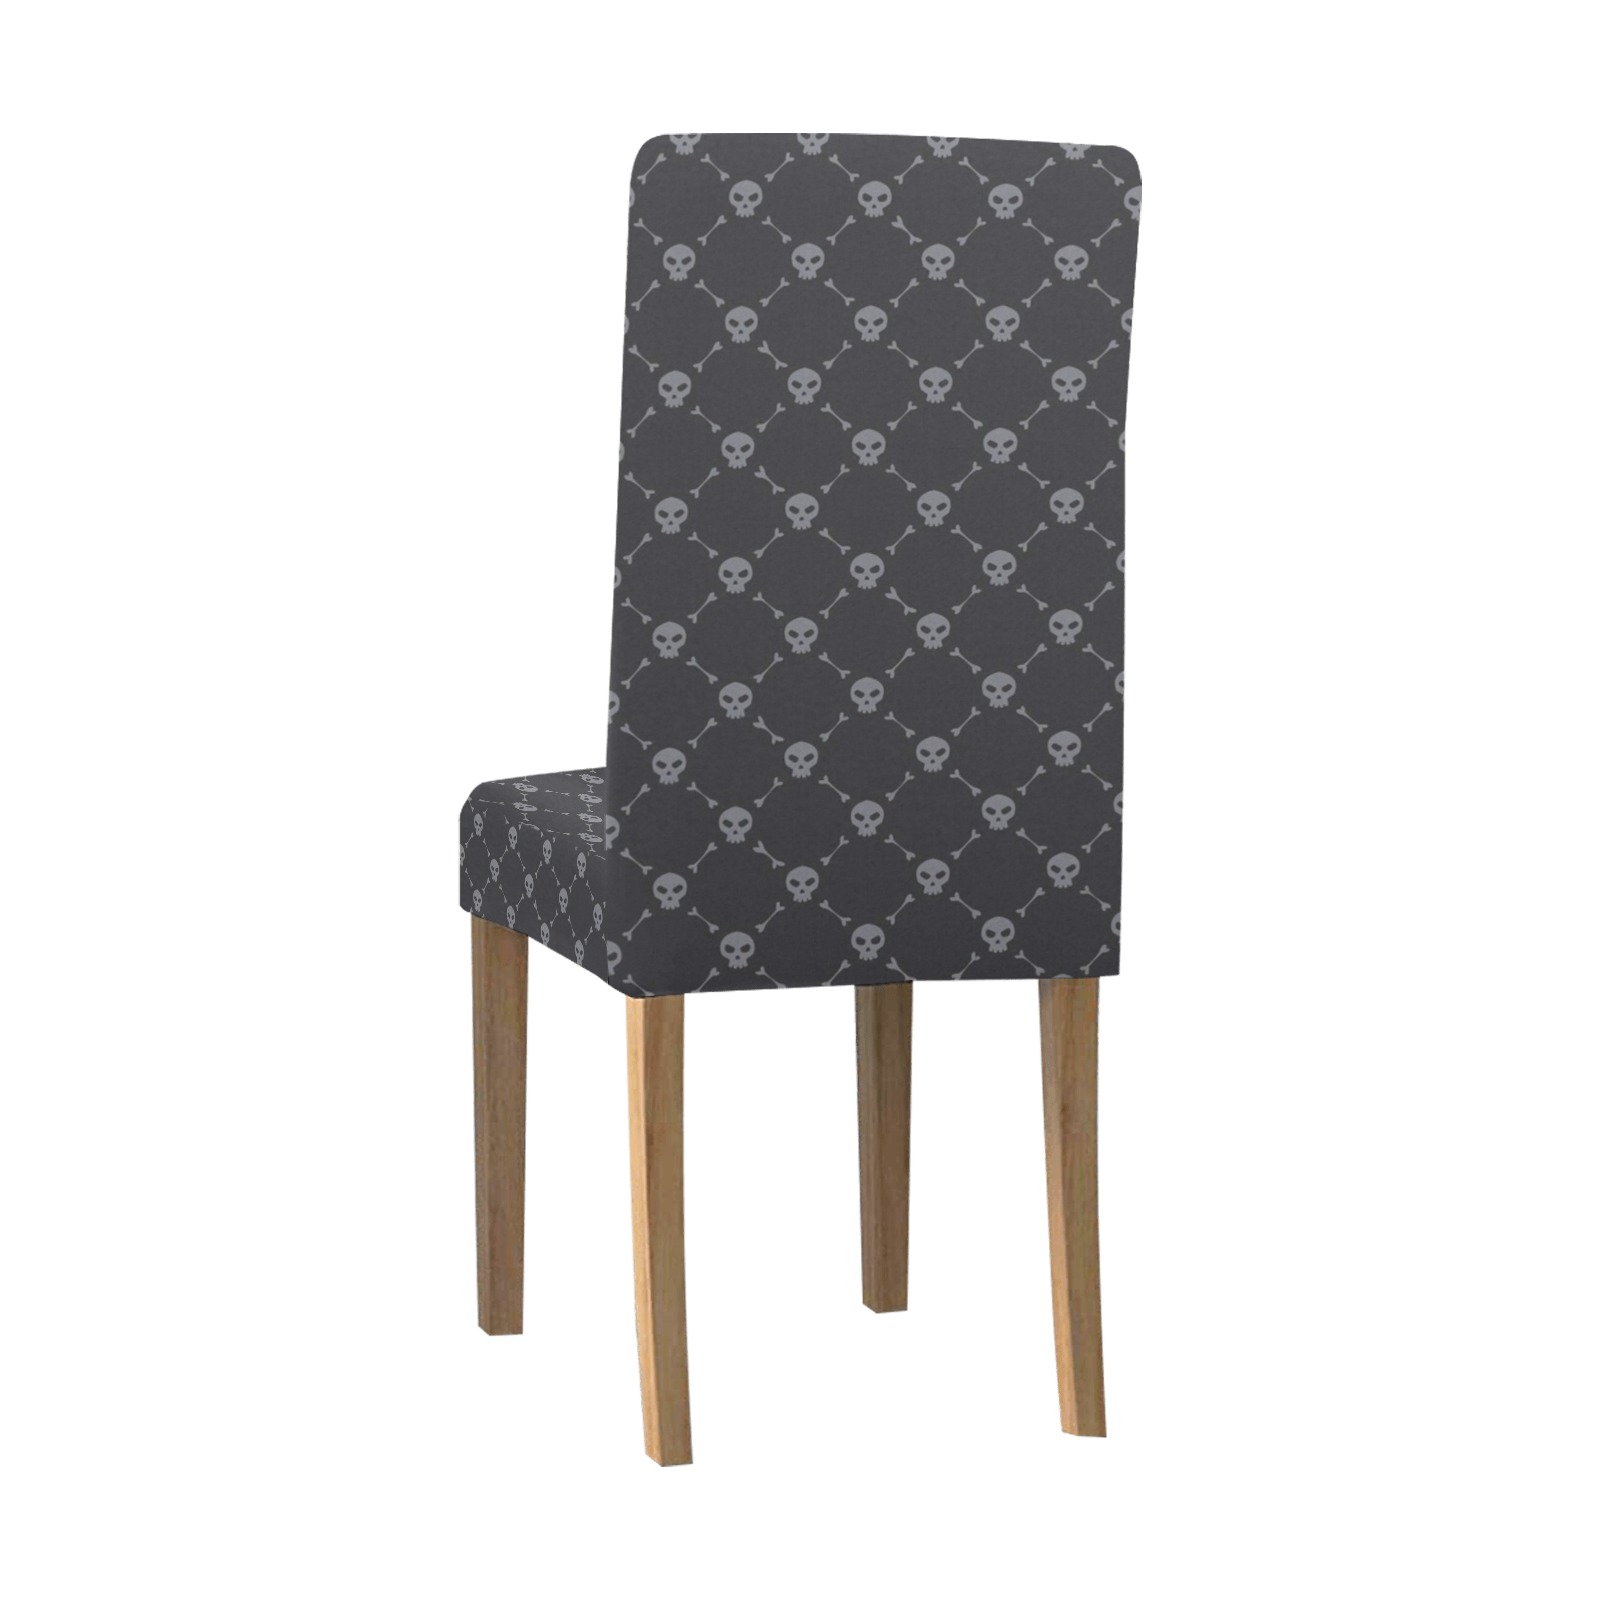 Skull Pattern Removable Dining Chair Cover